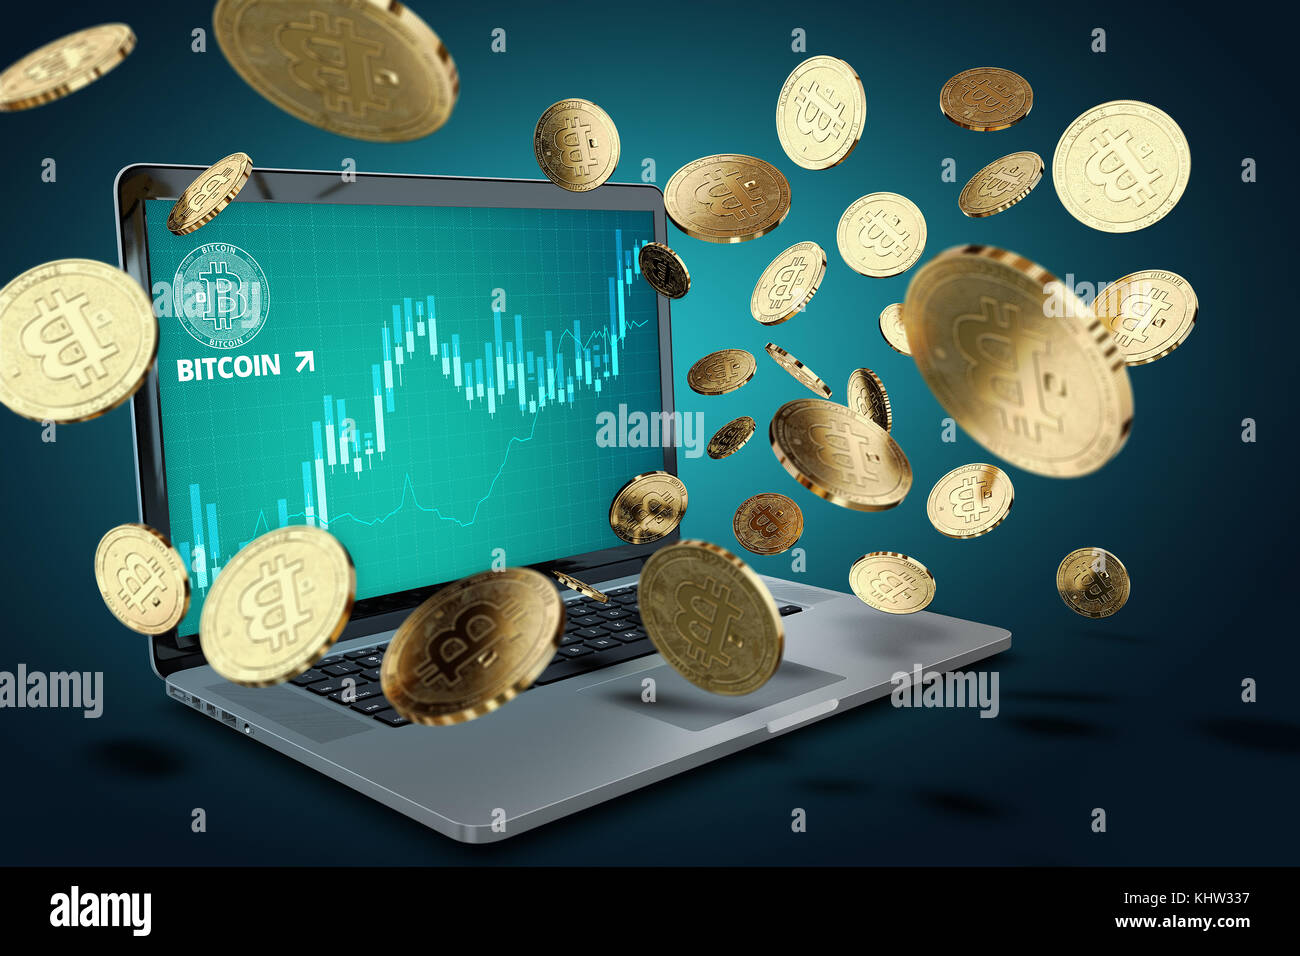 Floating Bitcoin coins against laptop with BTC success chart on-screen. Bitcoin growth concept. 3D illustration Stock Photo